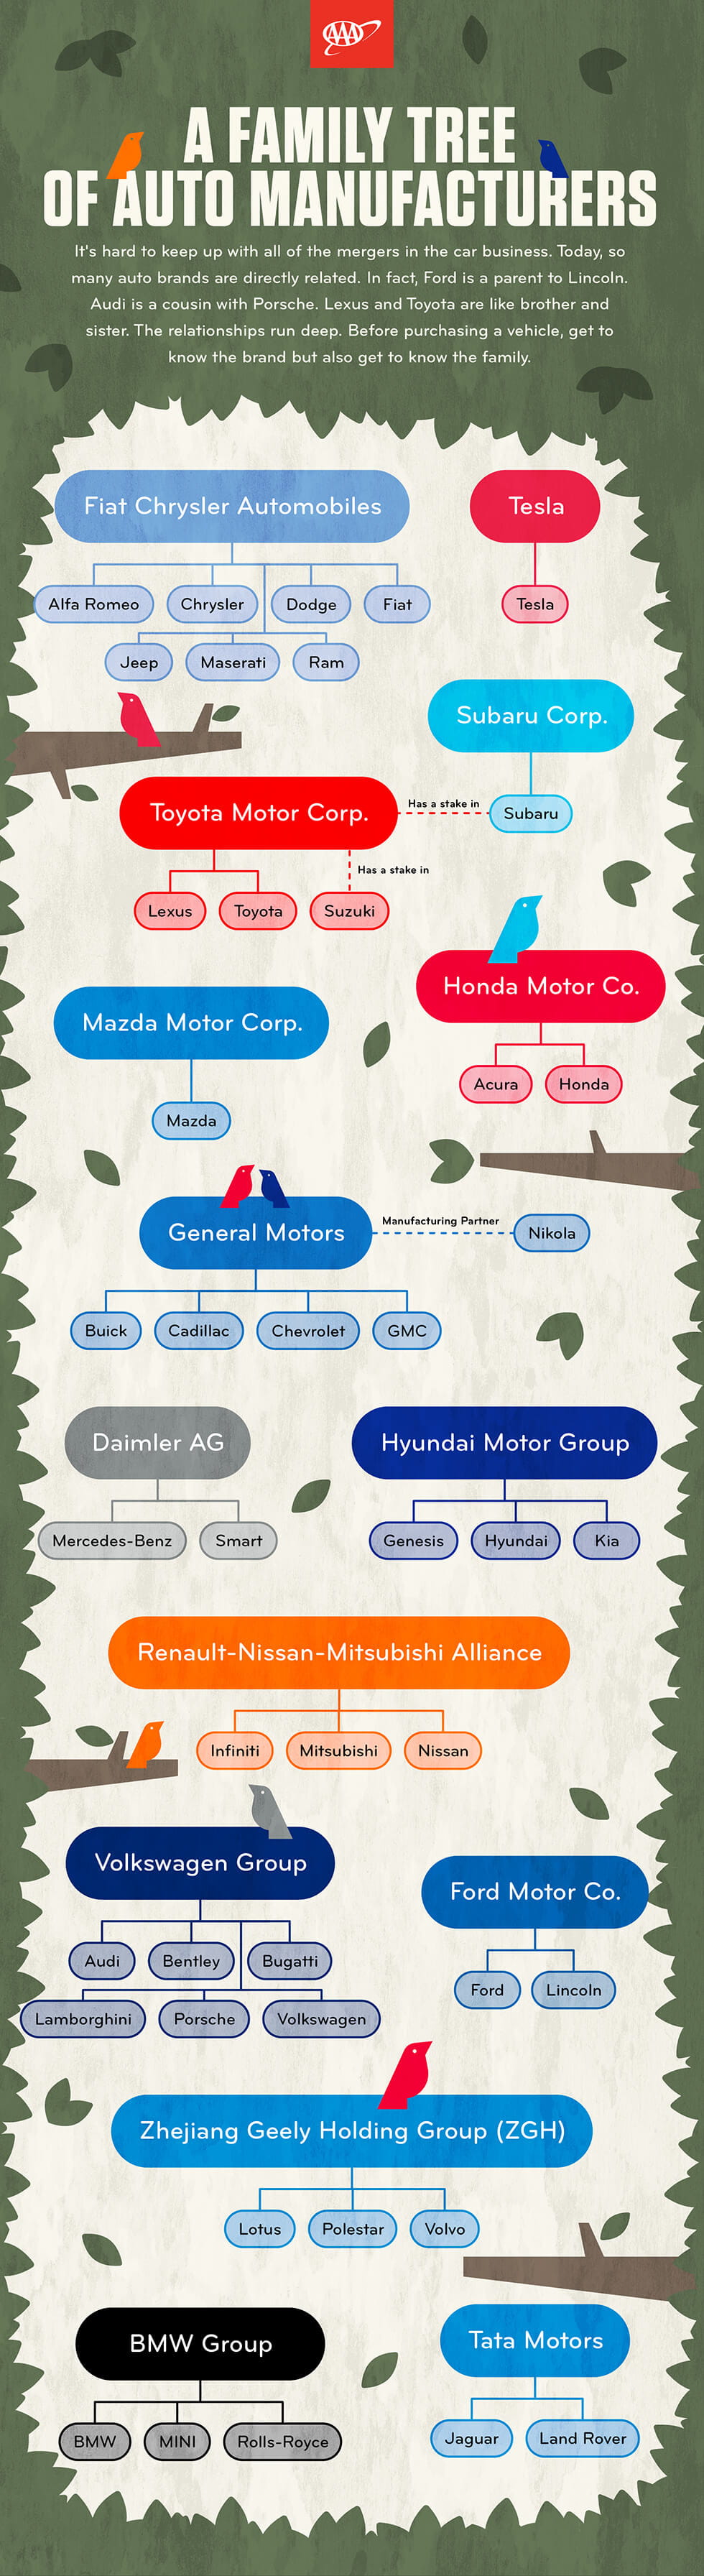 AAA Graphic Auto Makers Family Tree